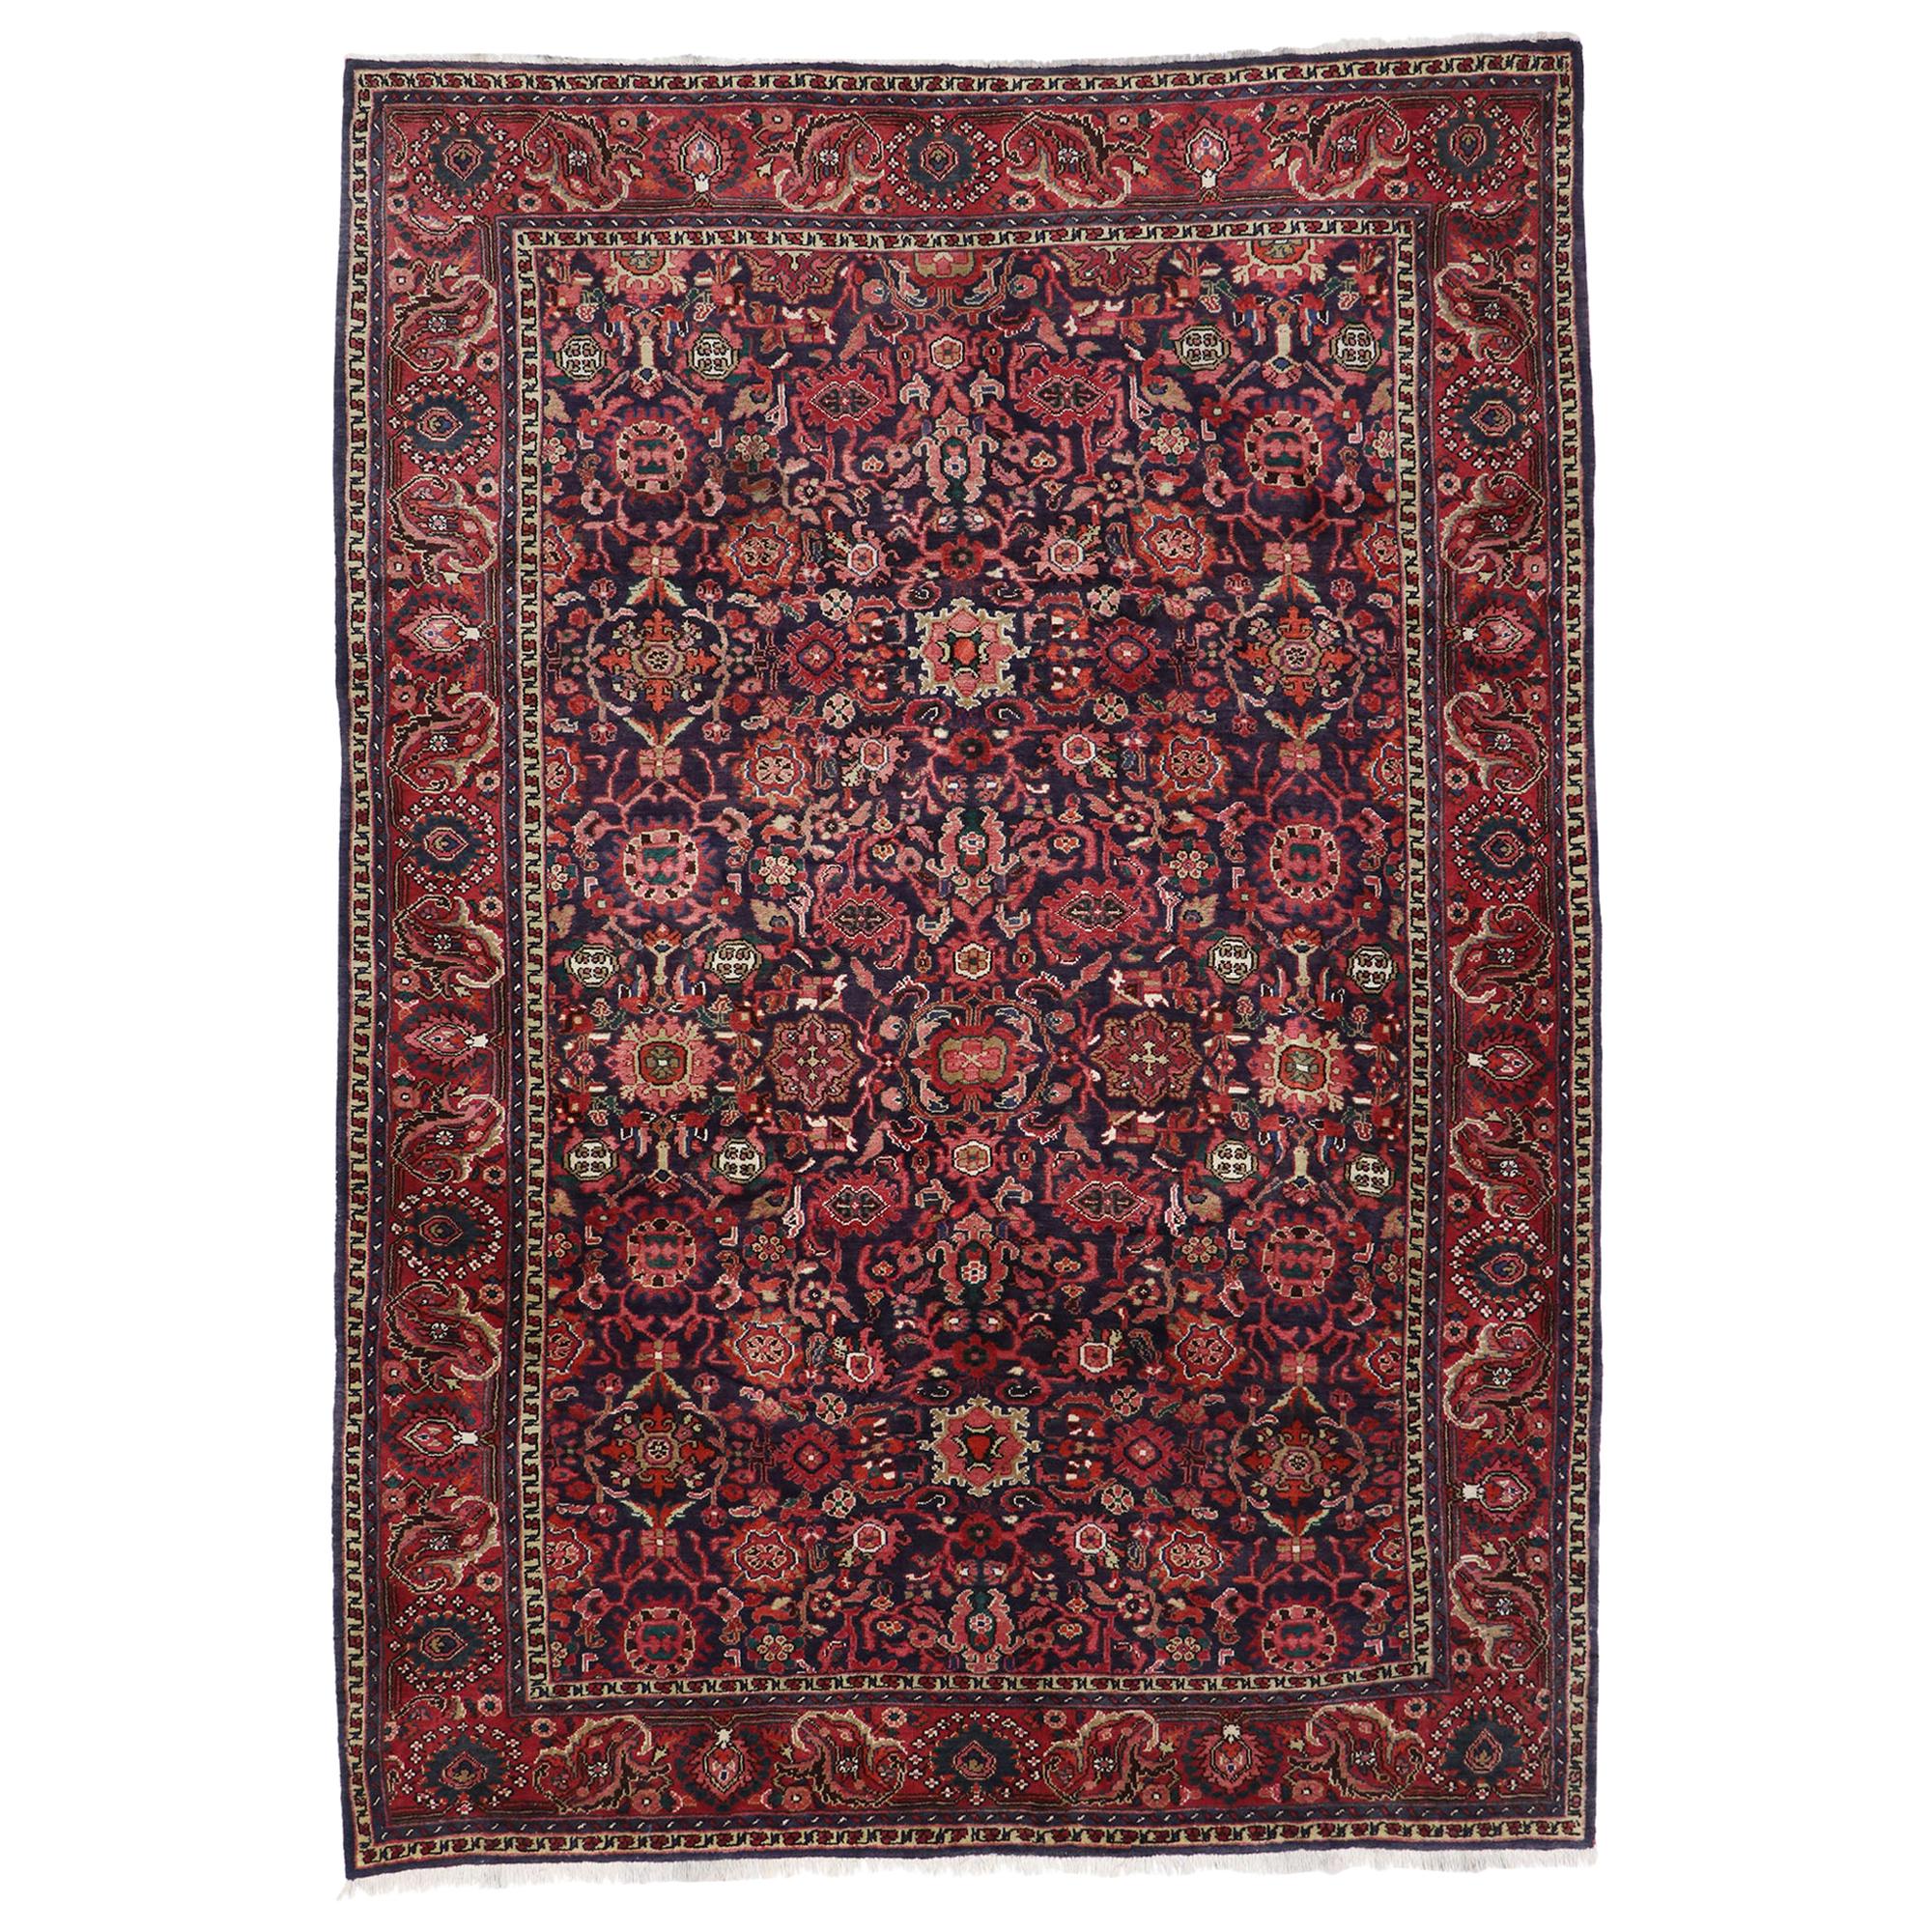 Antique Persian Malayer Rug with Regal Victorian Style